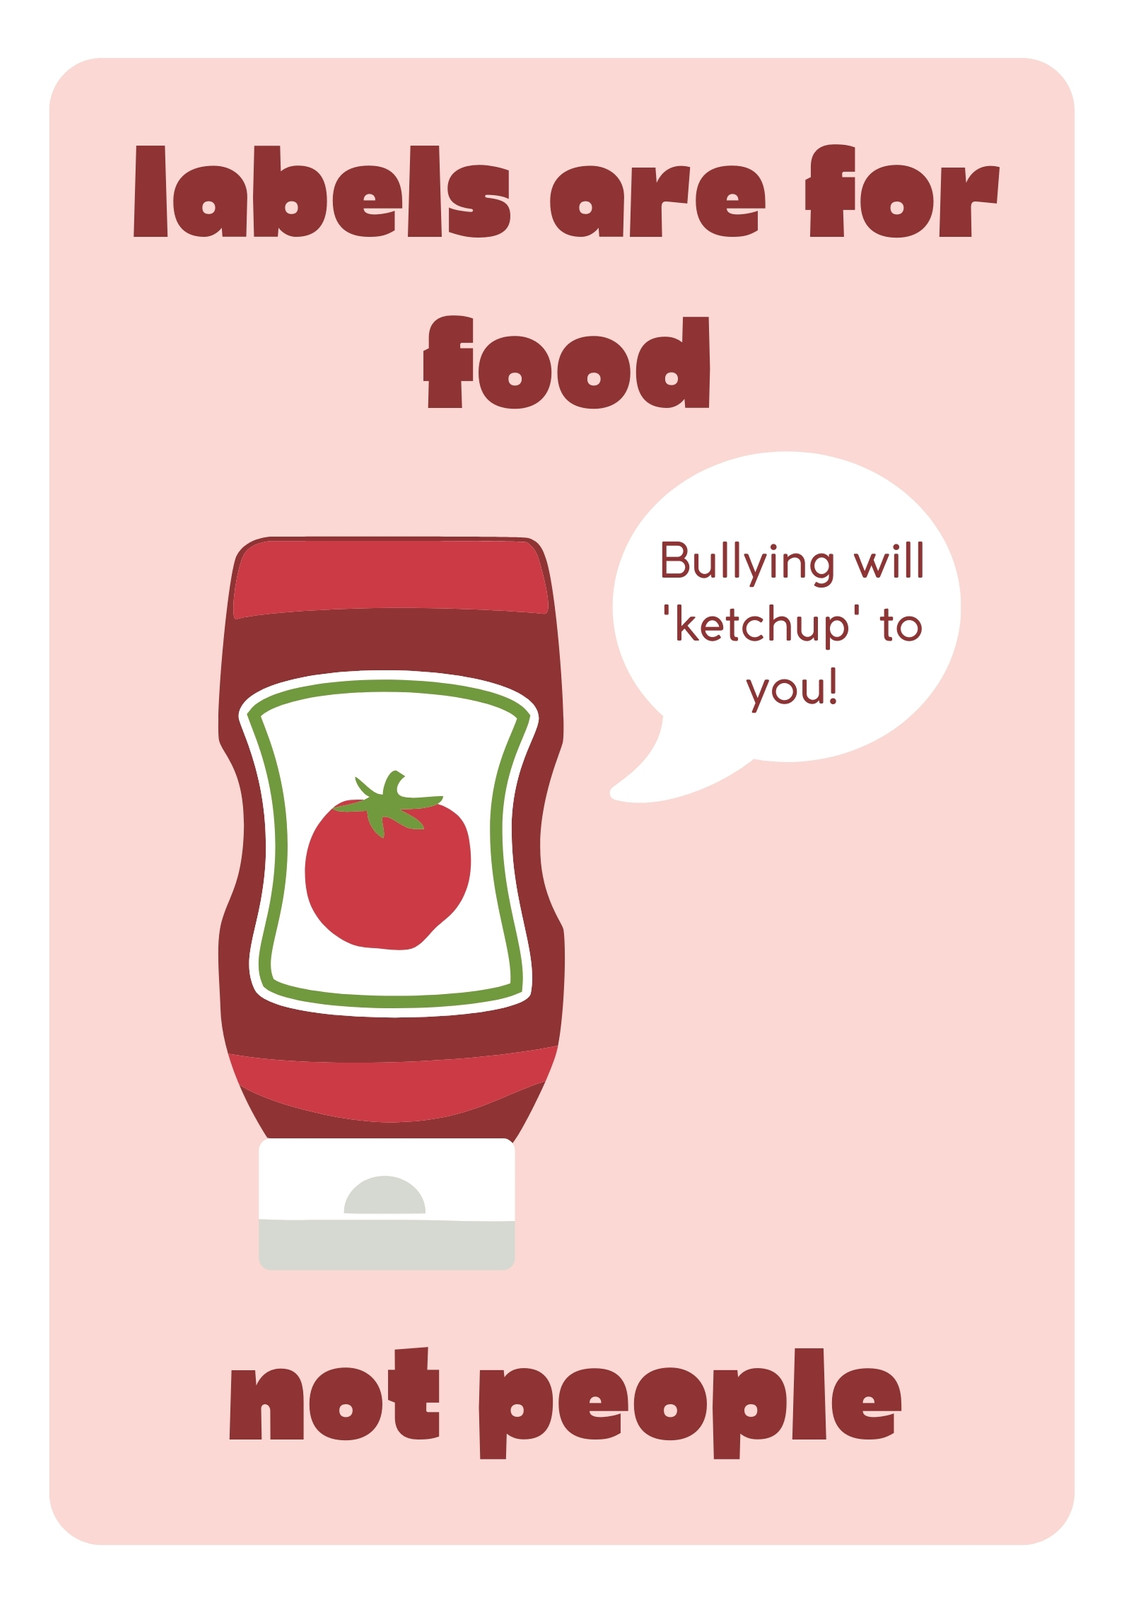 Bullying is a Crime Poster for Sale by VM04